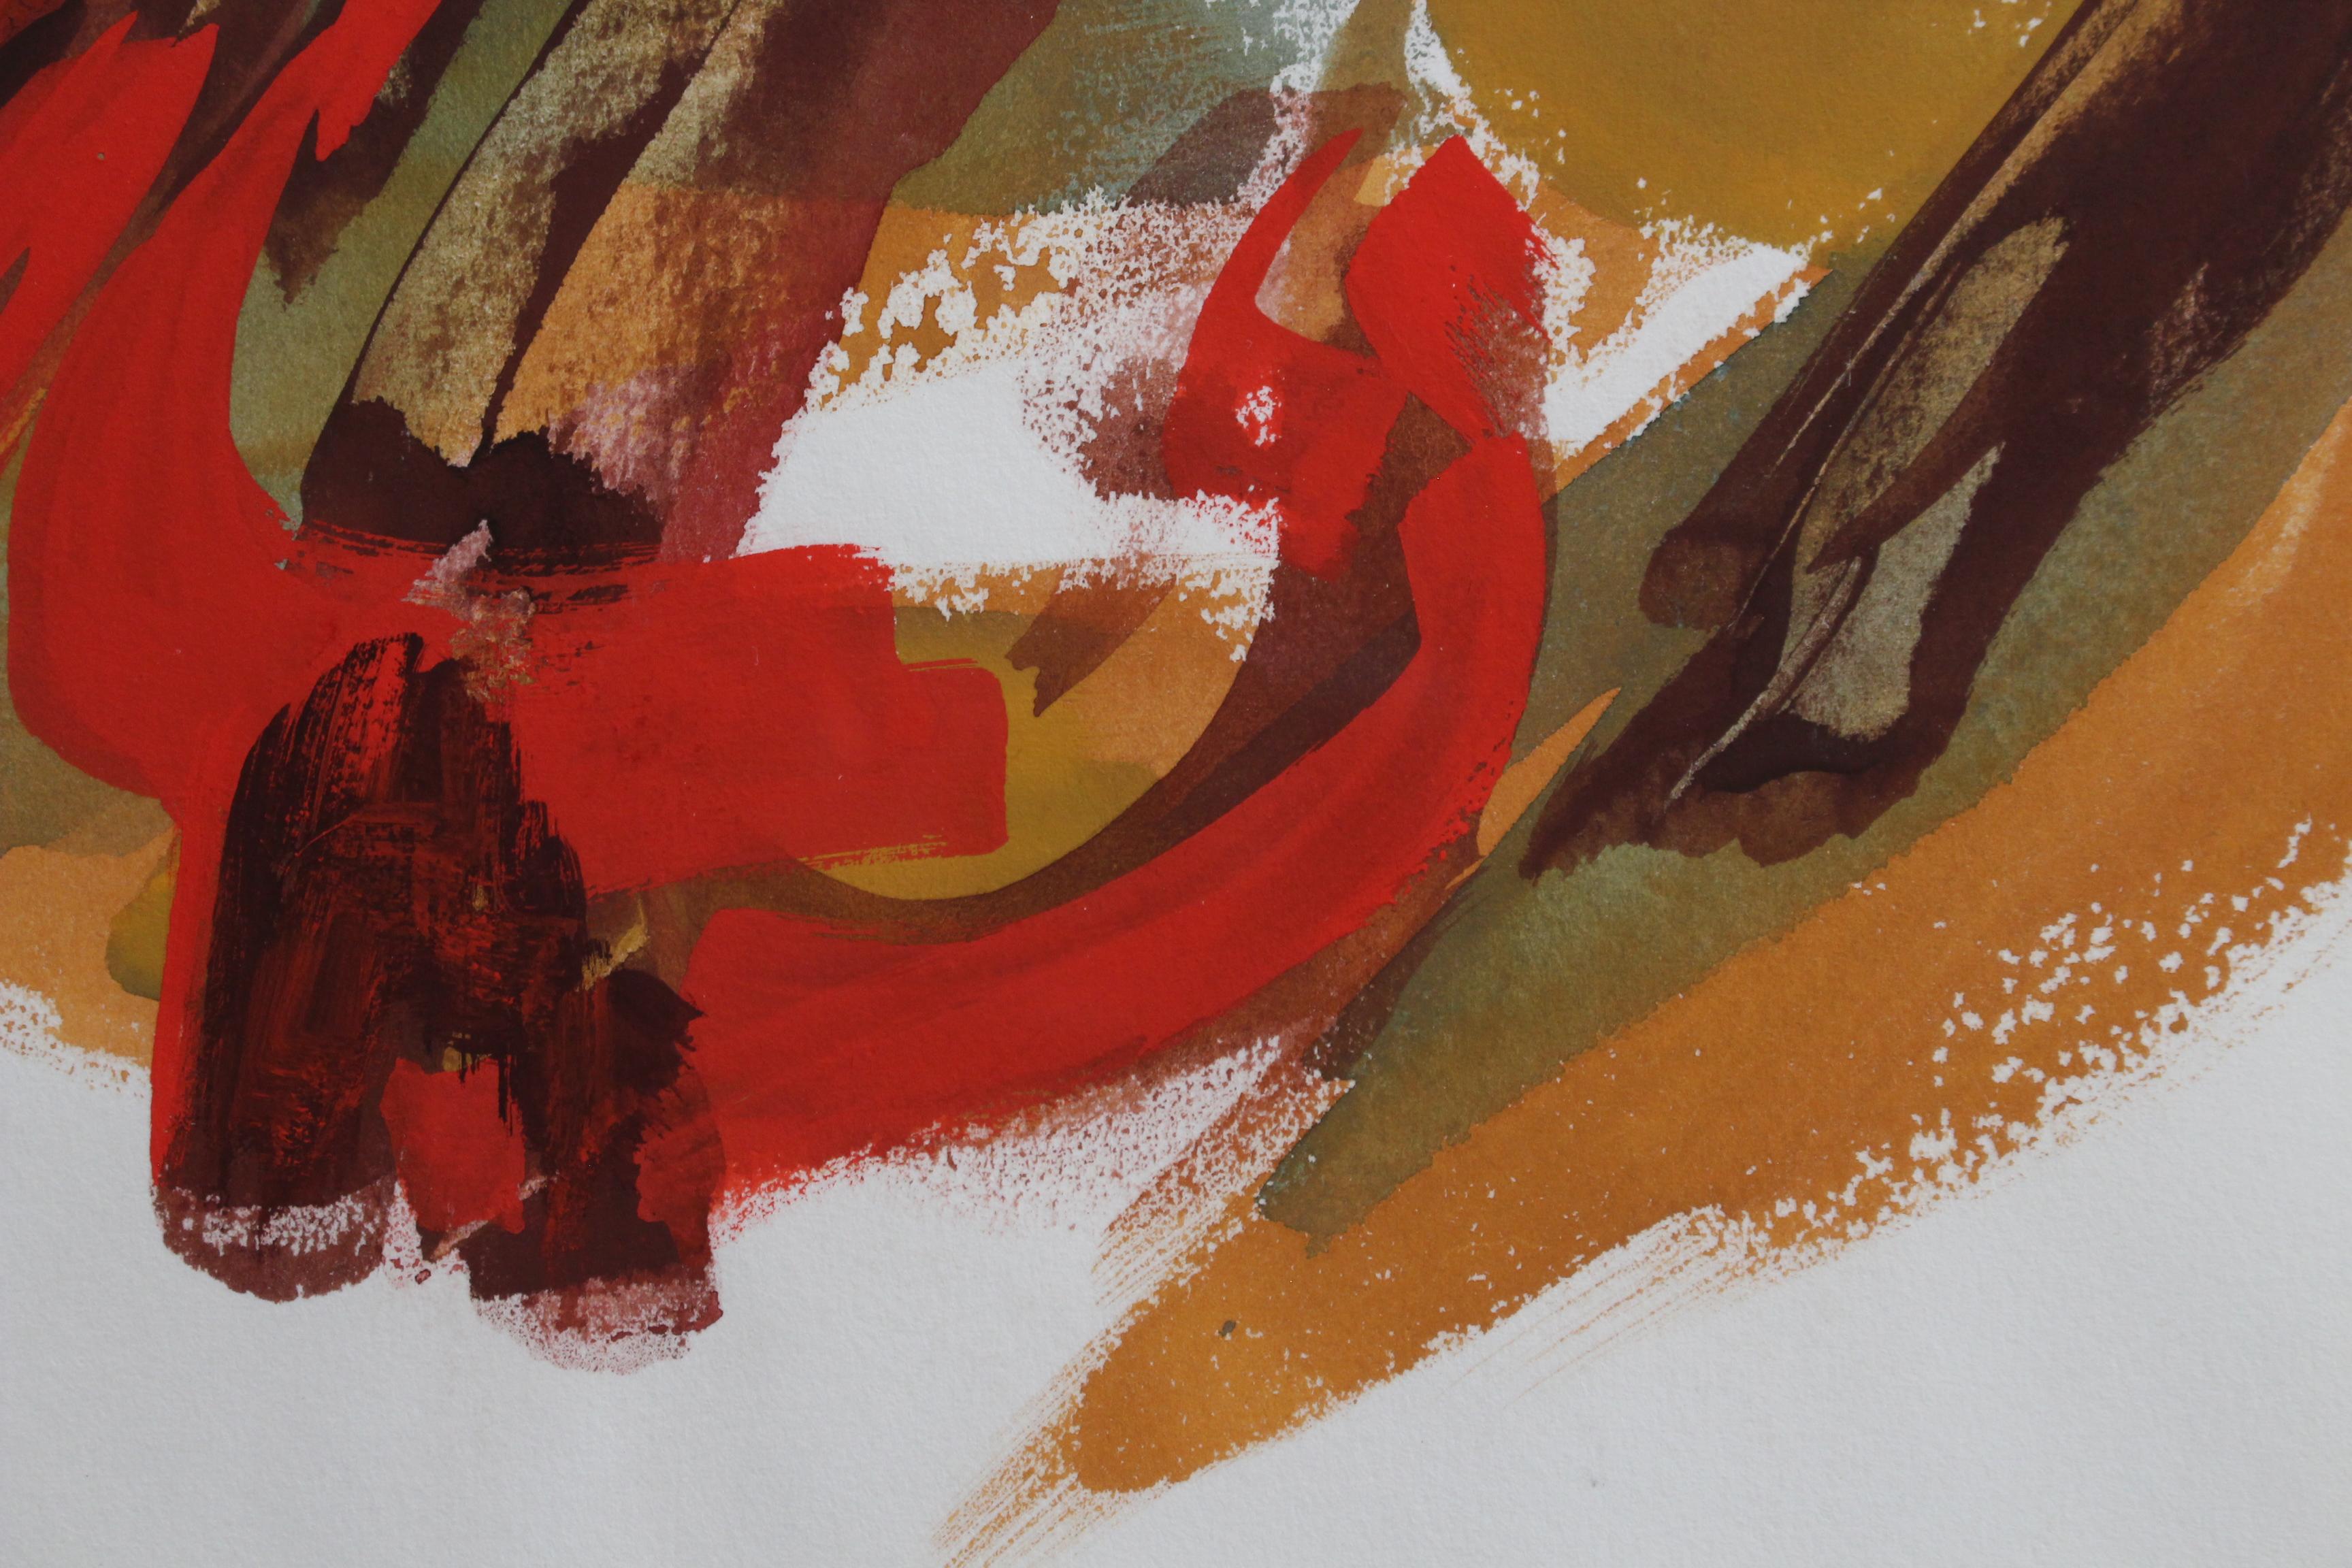 'Composition in Orange and Red', gouache on paper, by James Pichette (circa 1970s). A dynamic, lively abstract composition by an artist known for such stunning, vivid artworks. The painting is in good condition and has been newly framed and glazed.